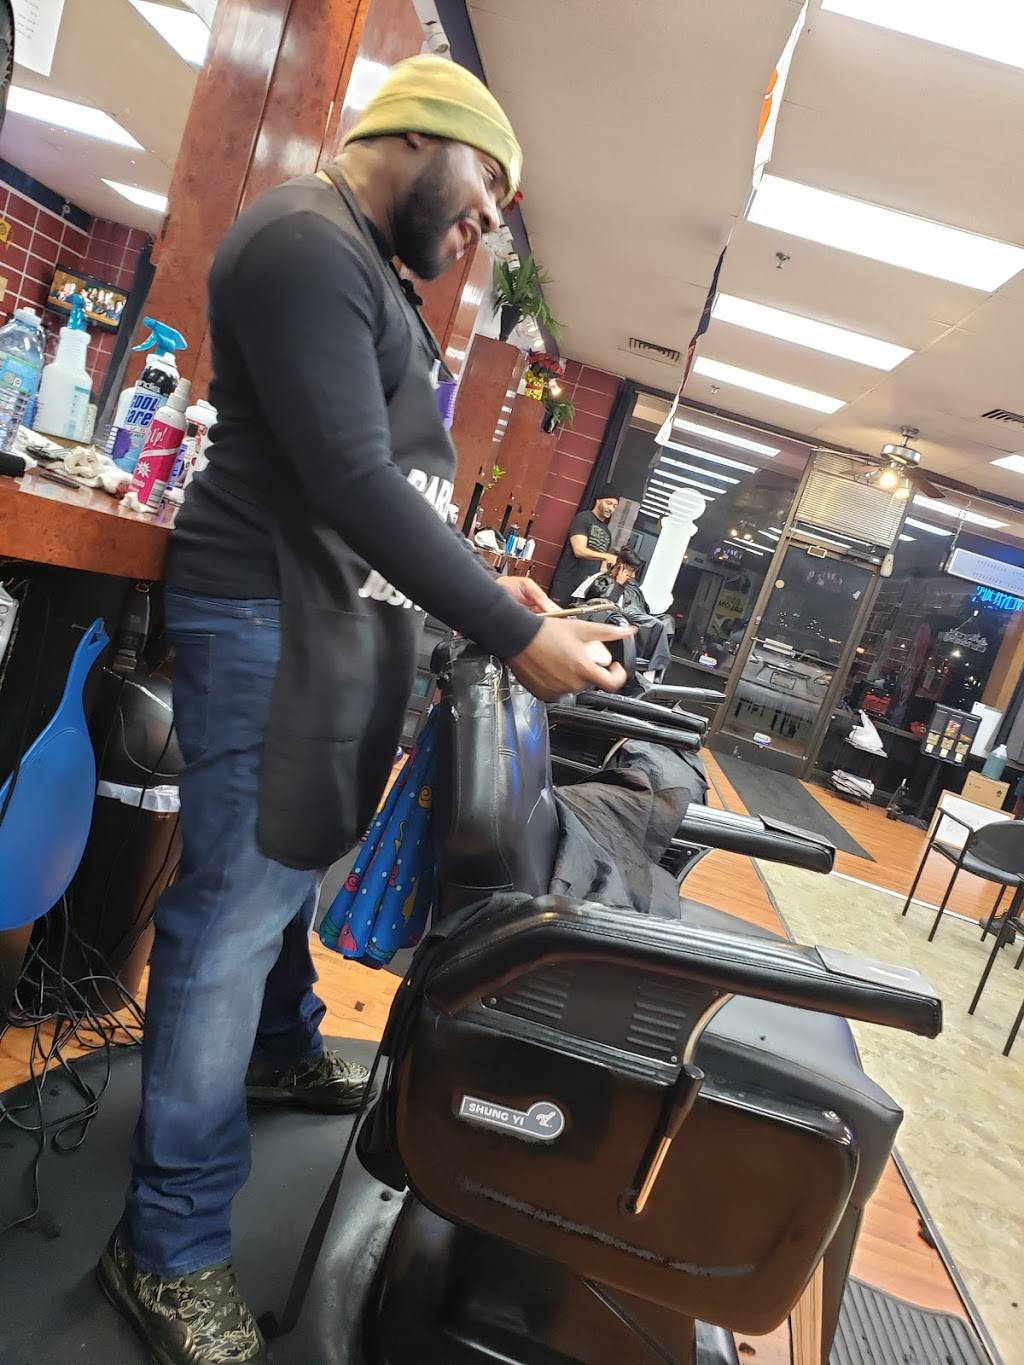 Overtons Barber & Styling | 5430 N Tryon St #2, Charlotte, NC 28213, USA | Phone: (704) 509-1240